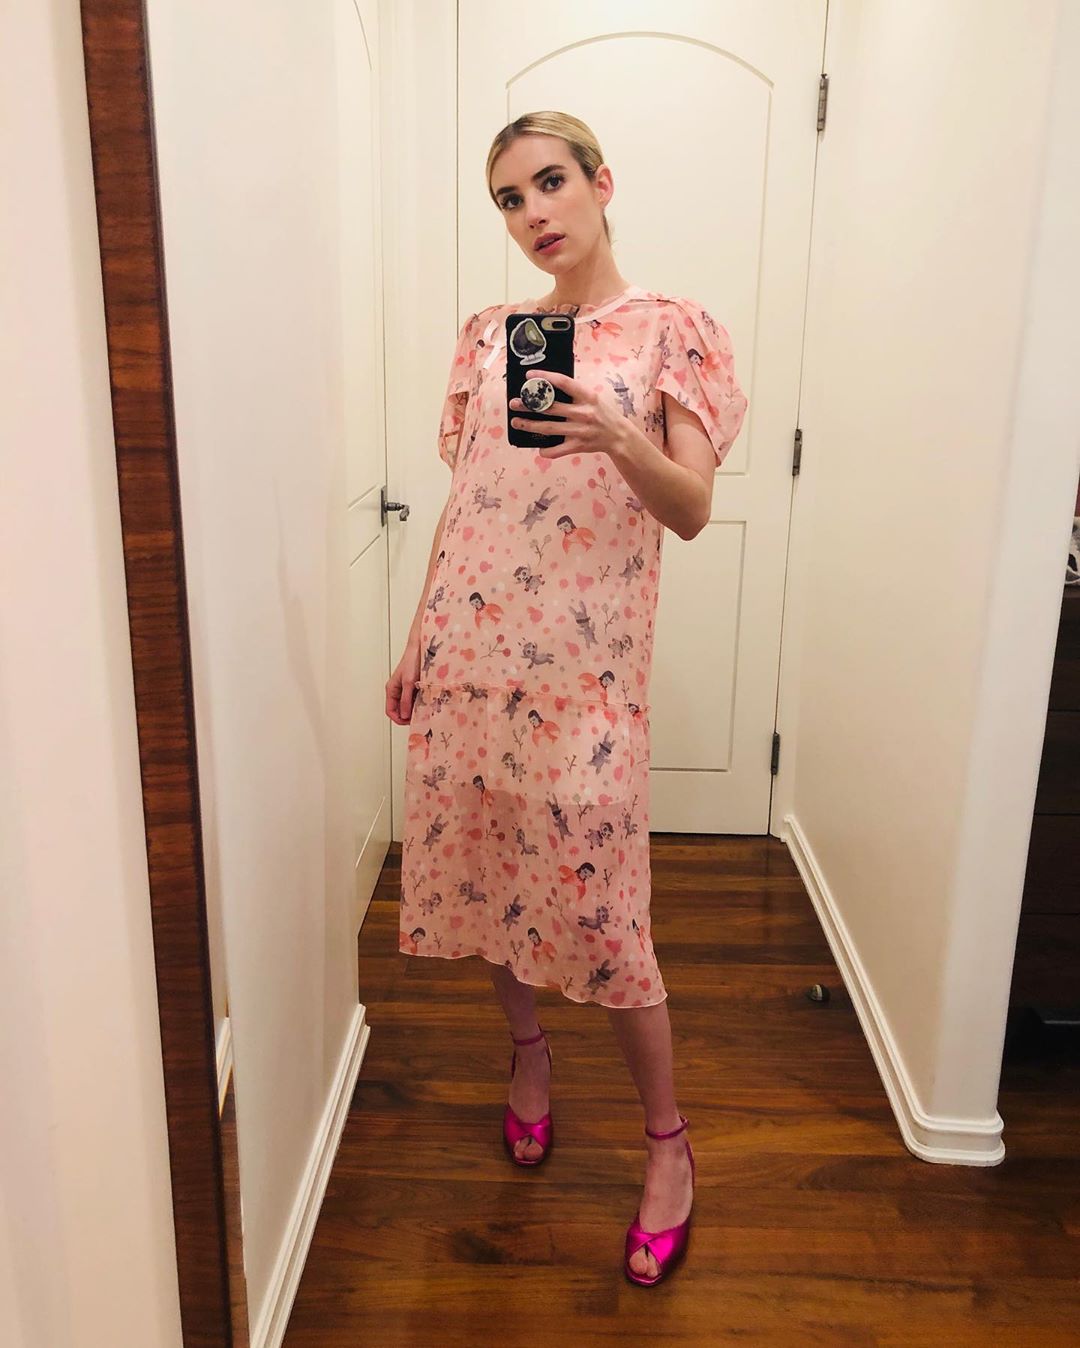 Photos n°6 : Emma Roberts Back with The Quarantine Fits!